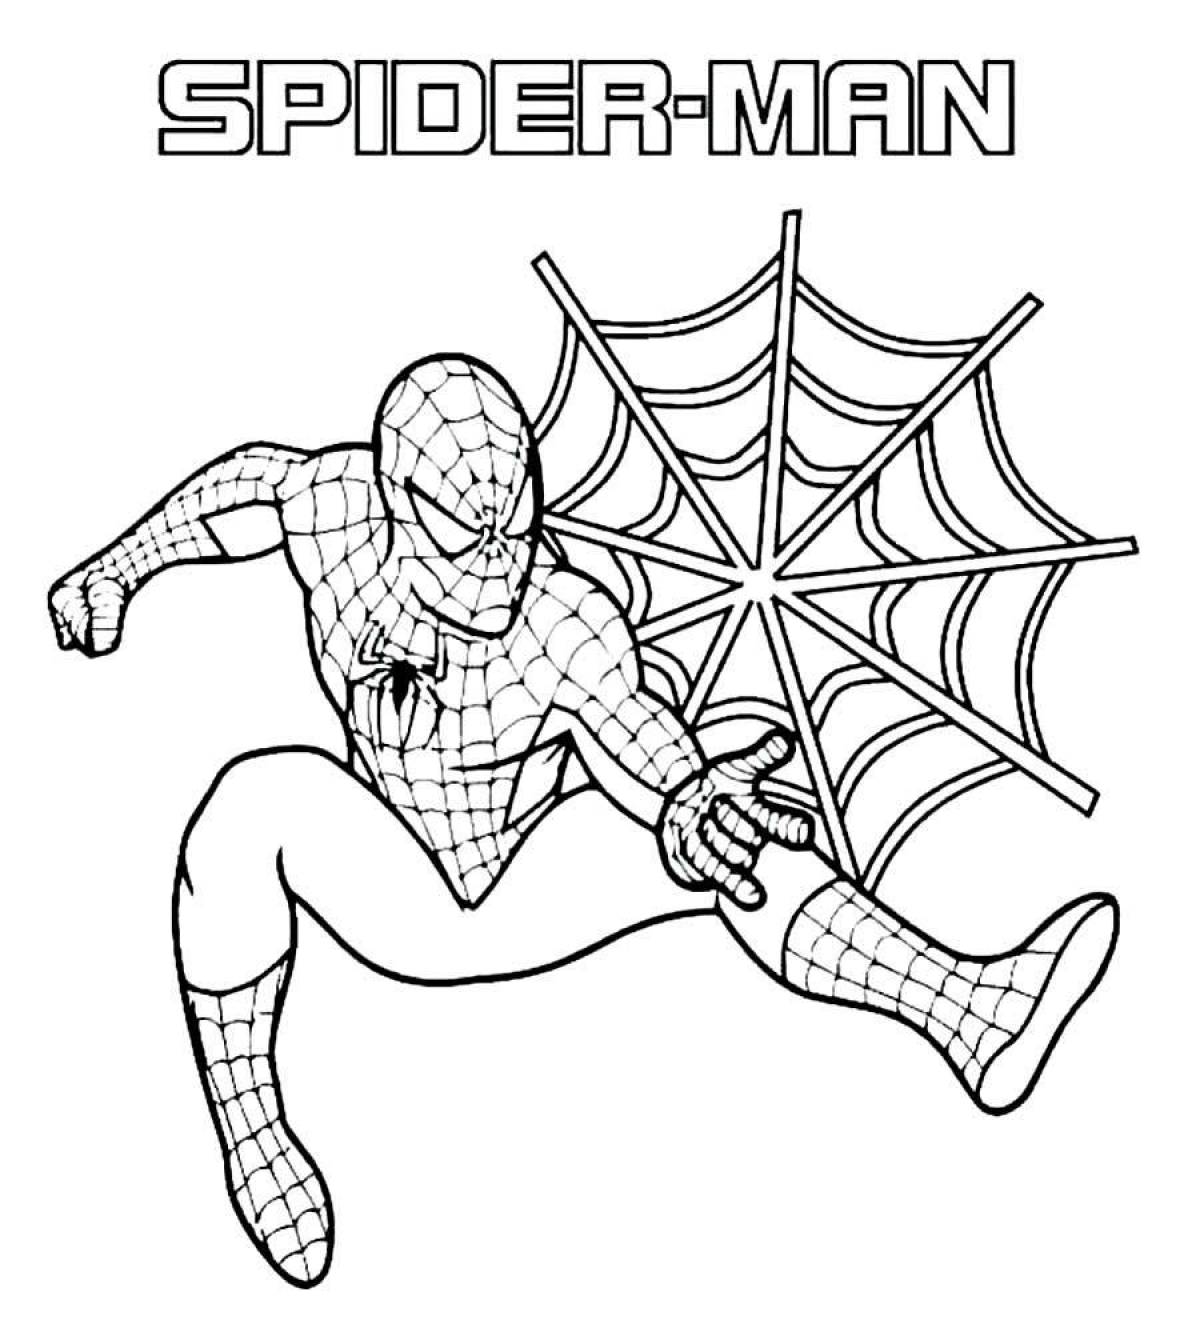 Sweet Spiderman coloring pages for kids